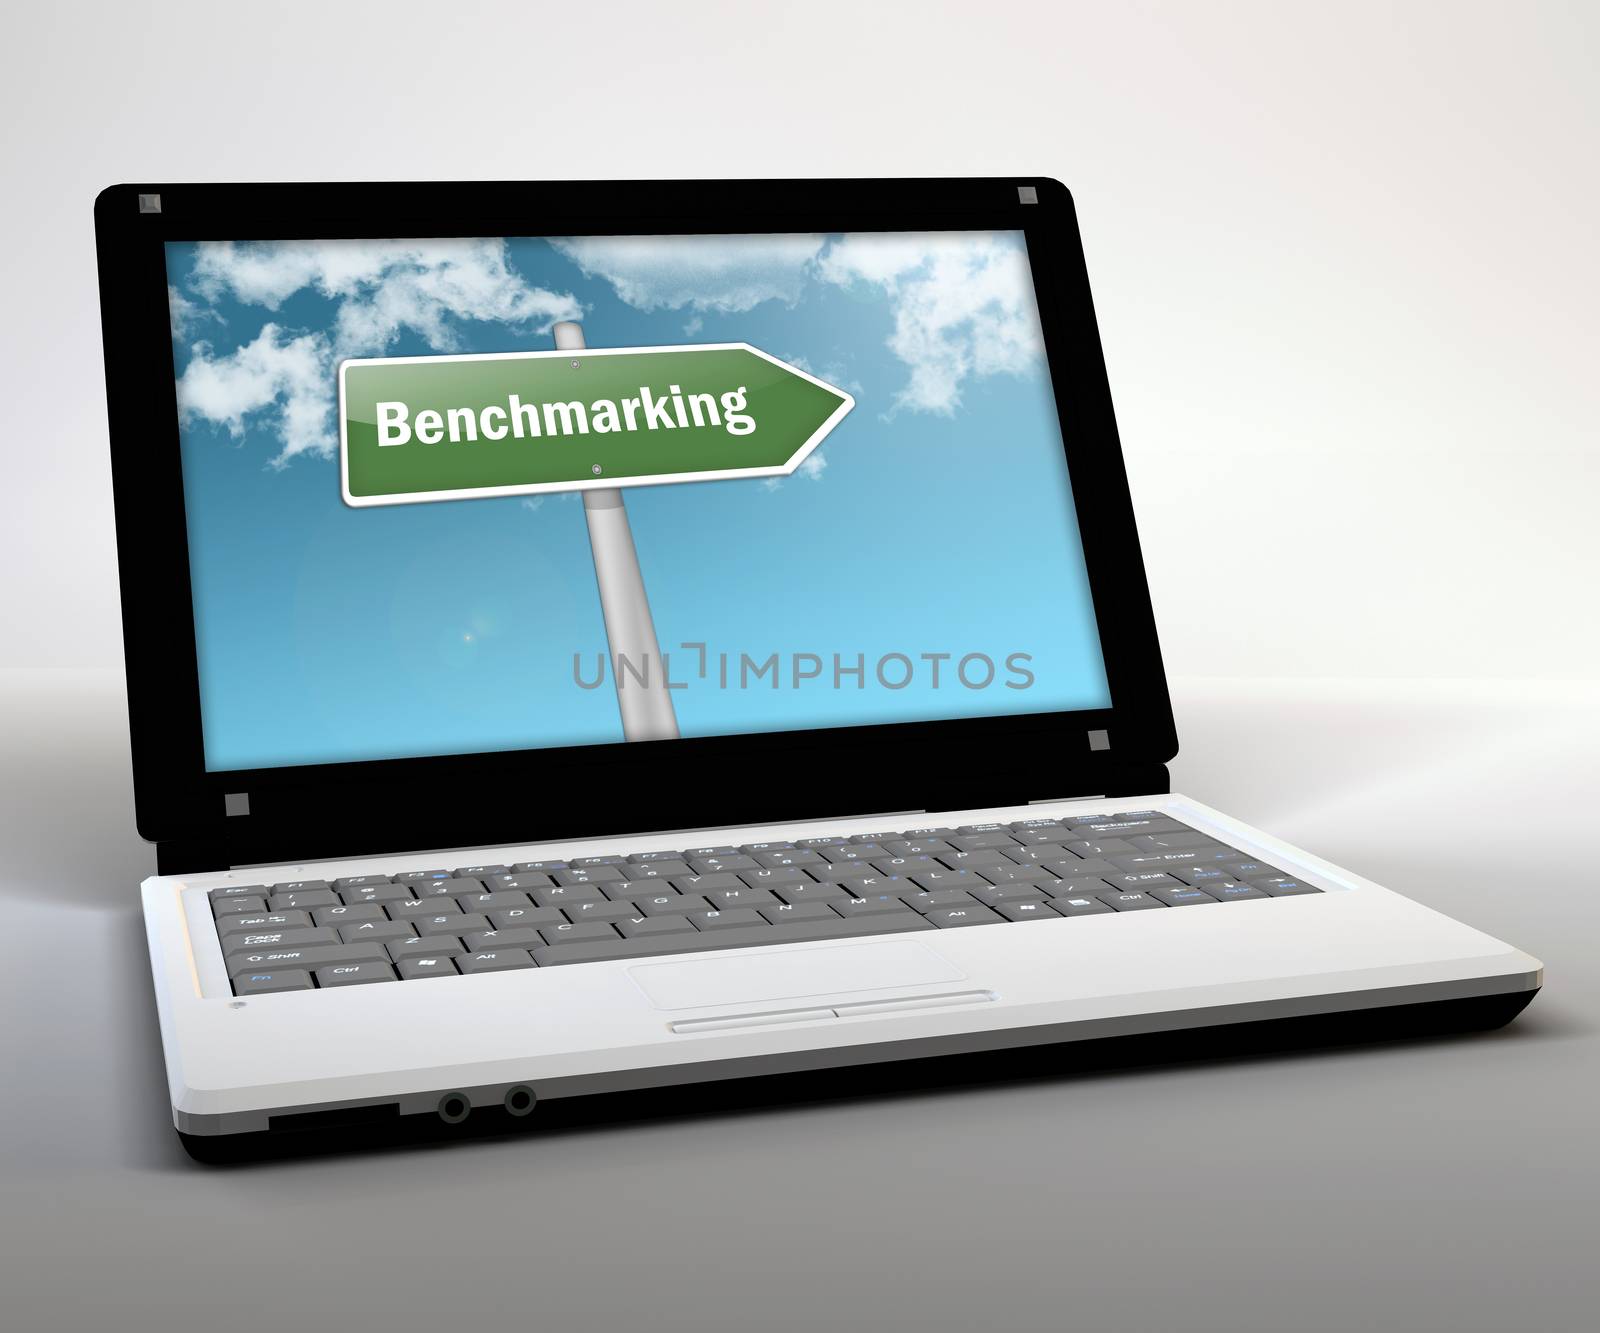 Mobile Thin Client "Benchmarking" by mindscanner